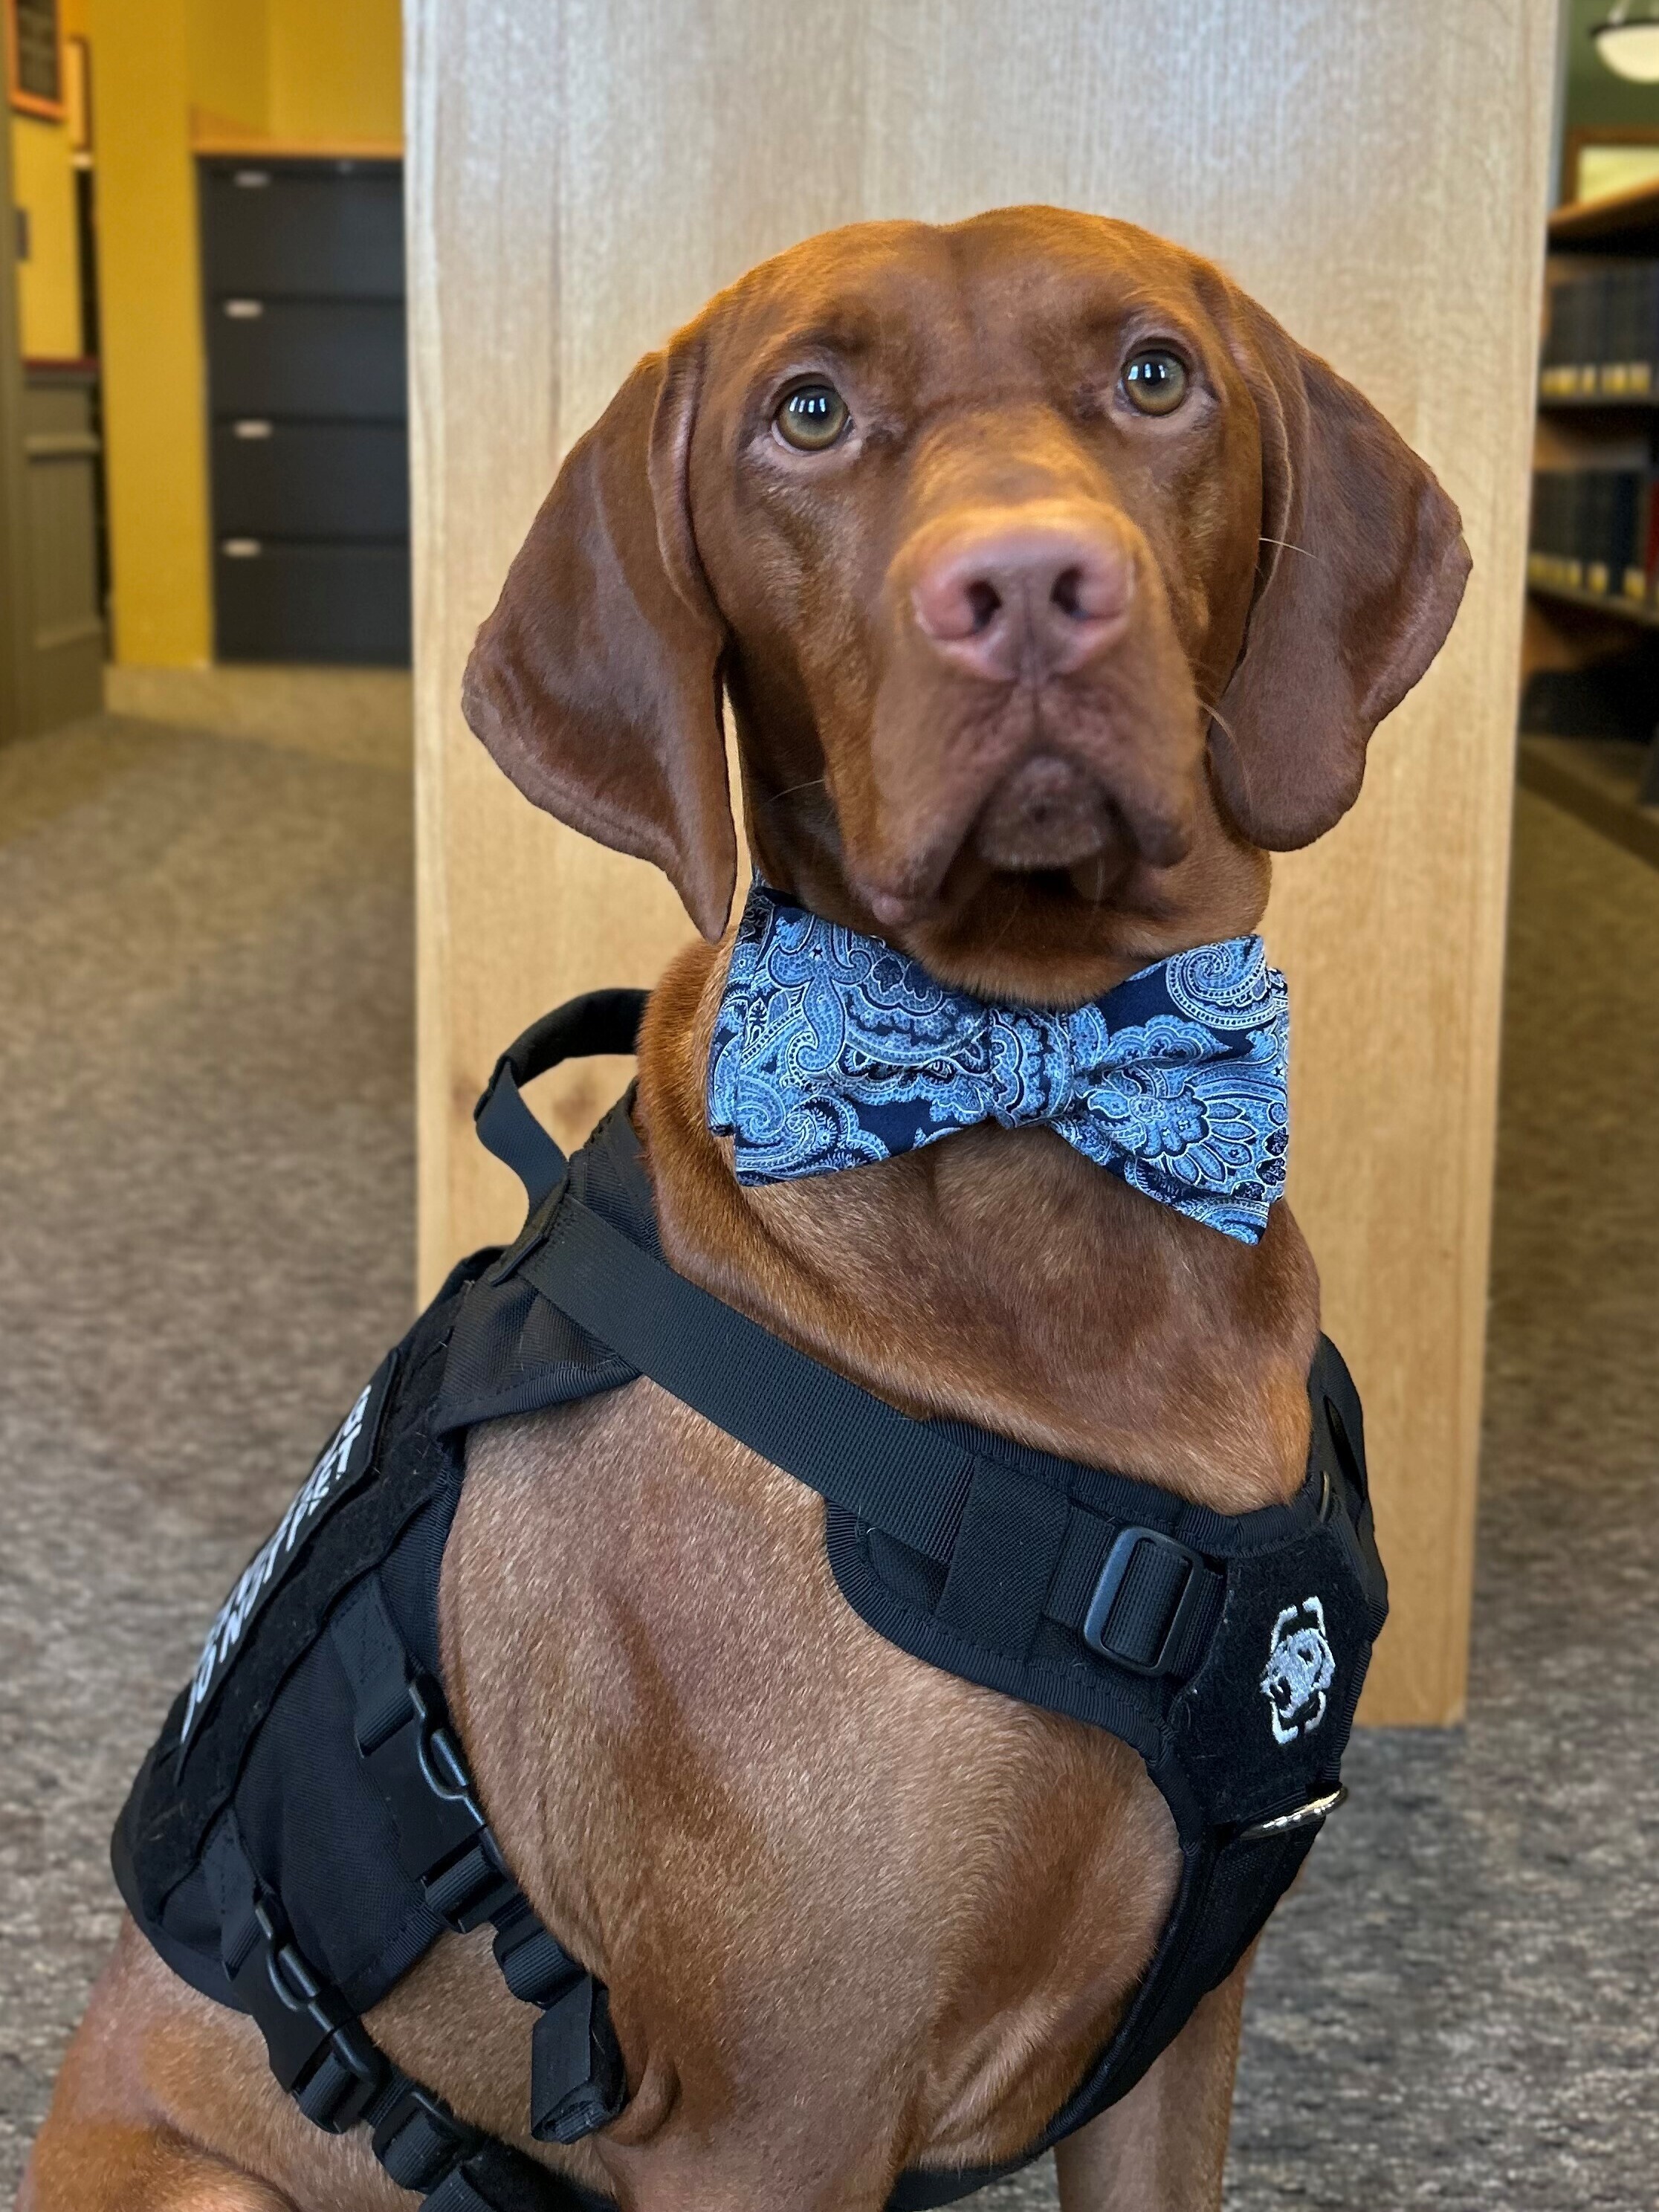 A brown dog wearing a bow tie and a black service dog vest